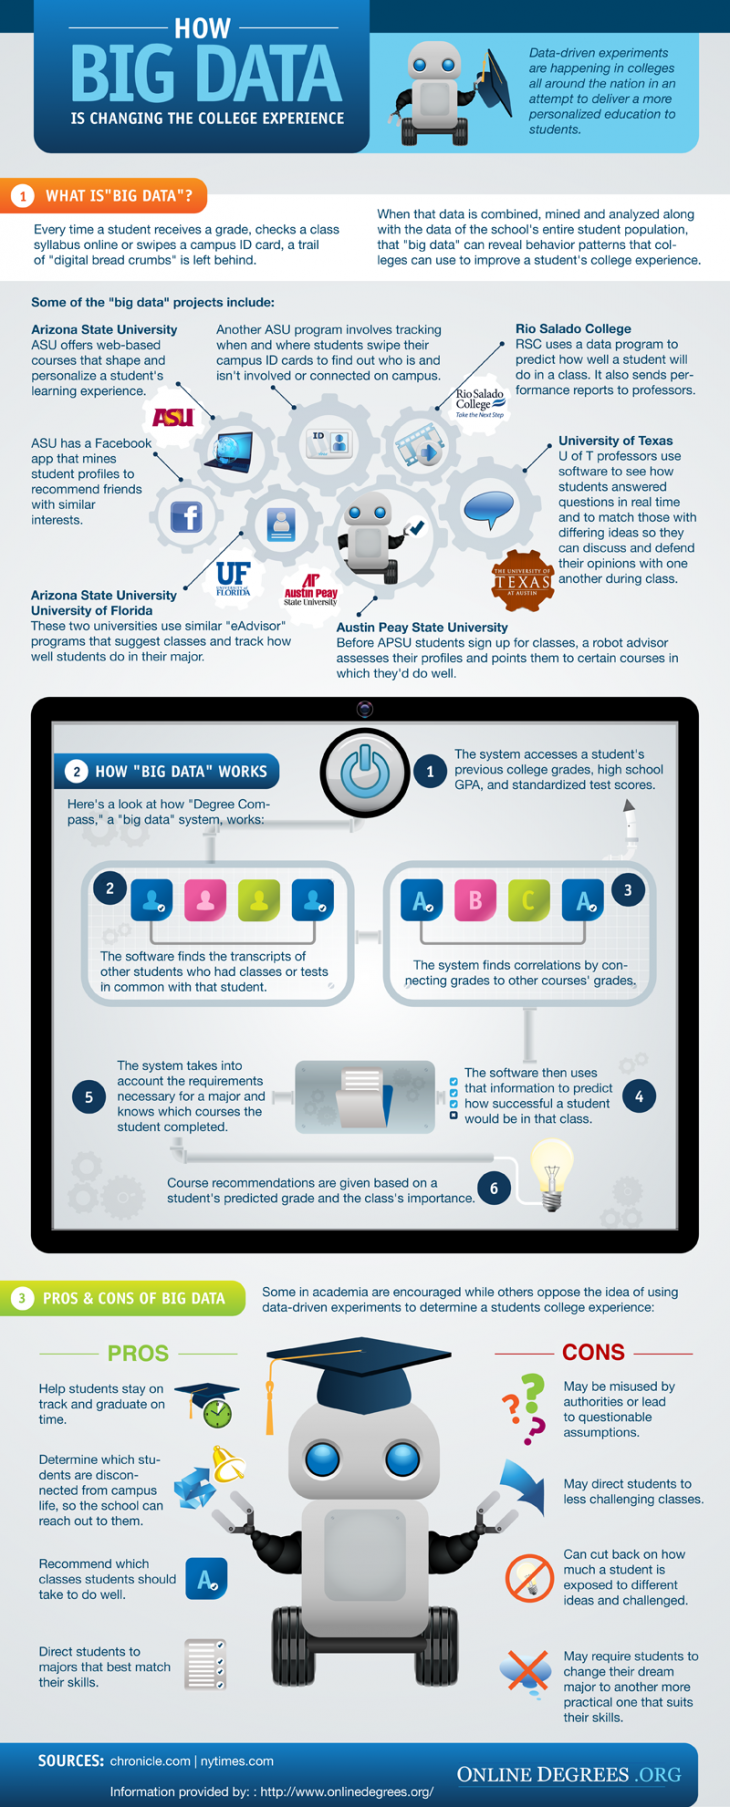 Big Data in Higher Education Infographic